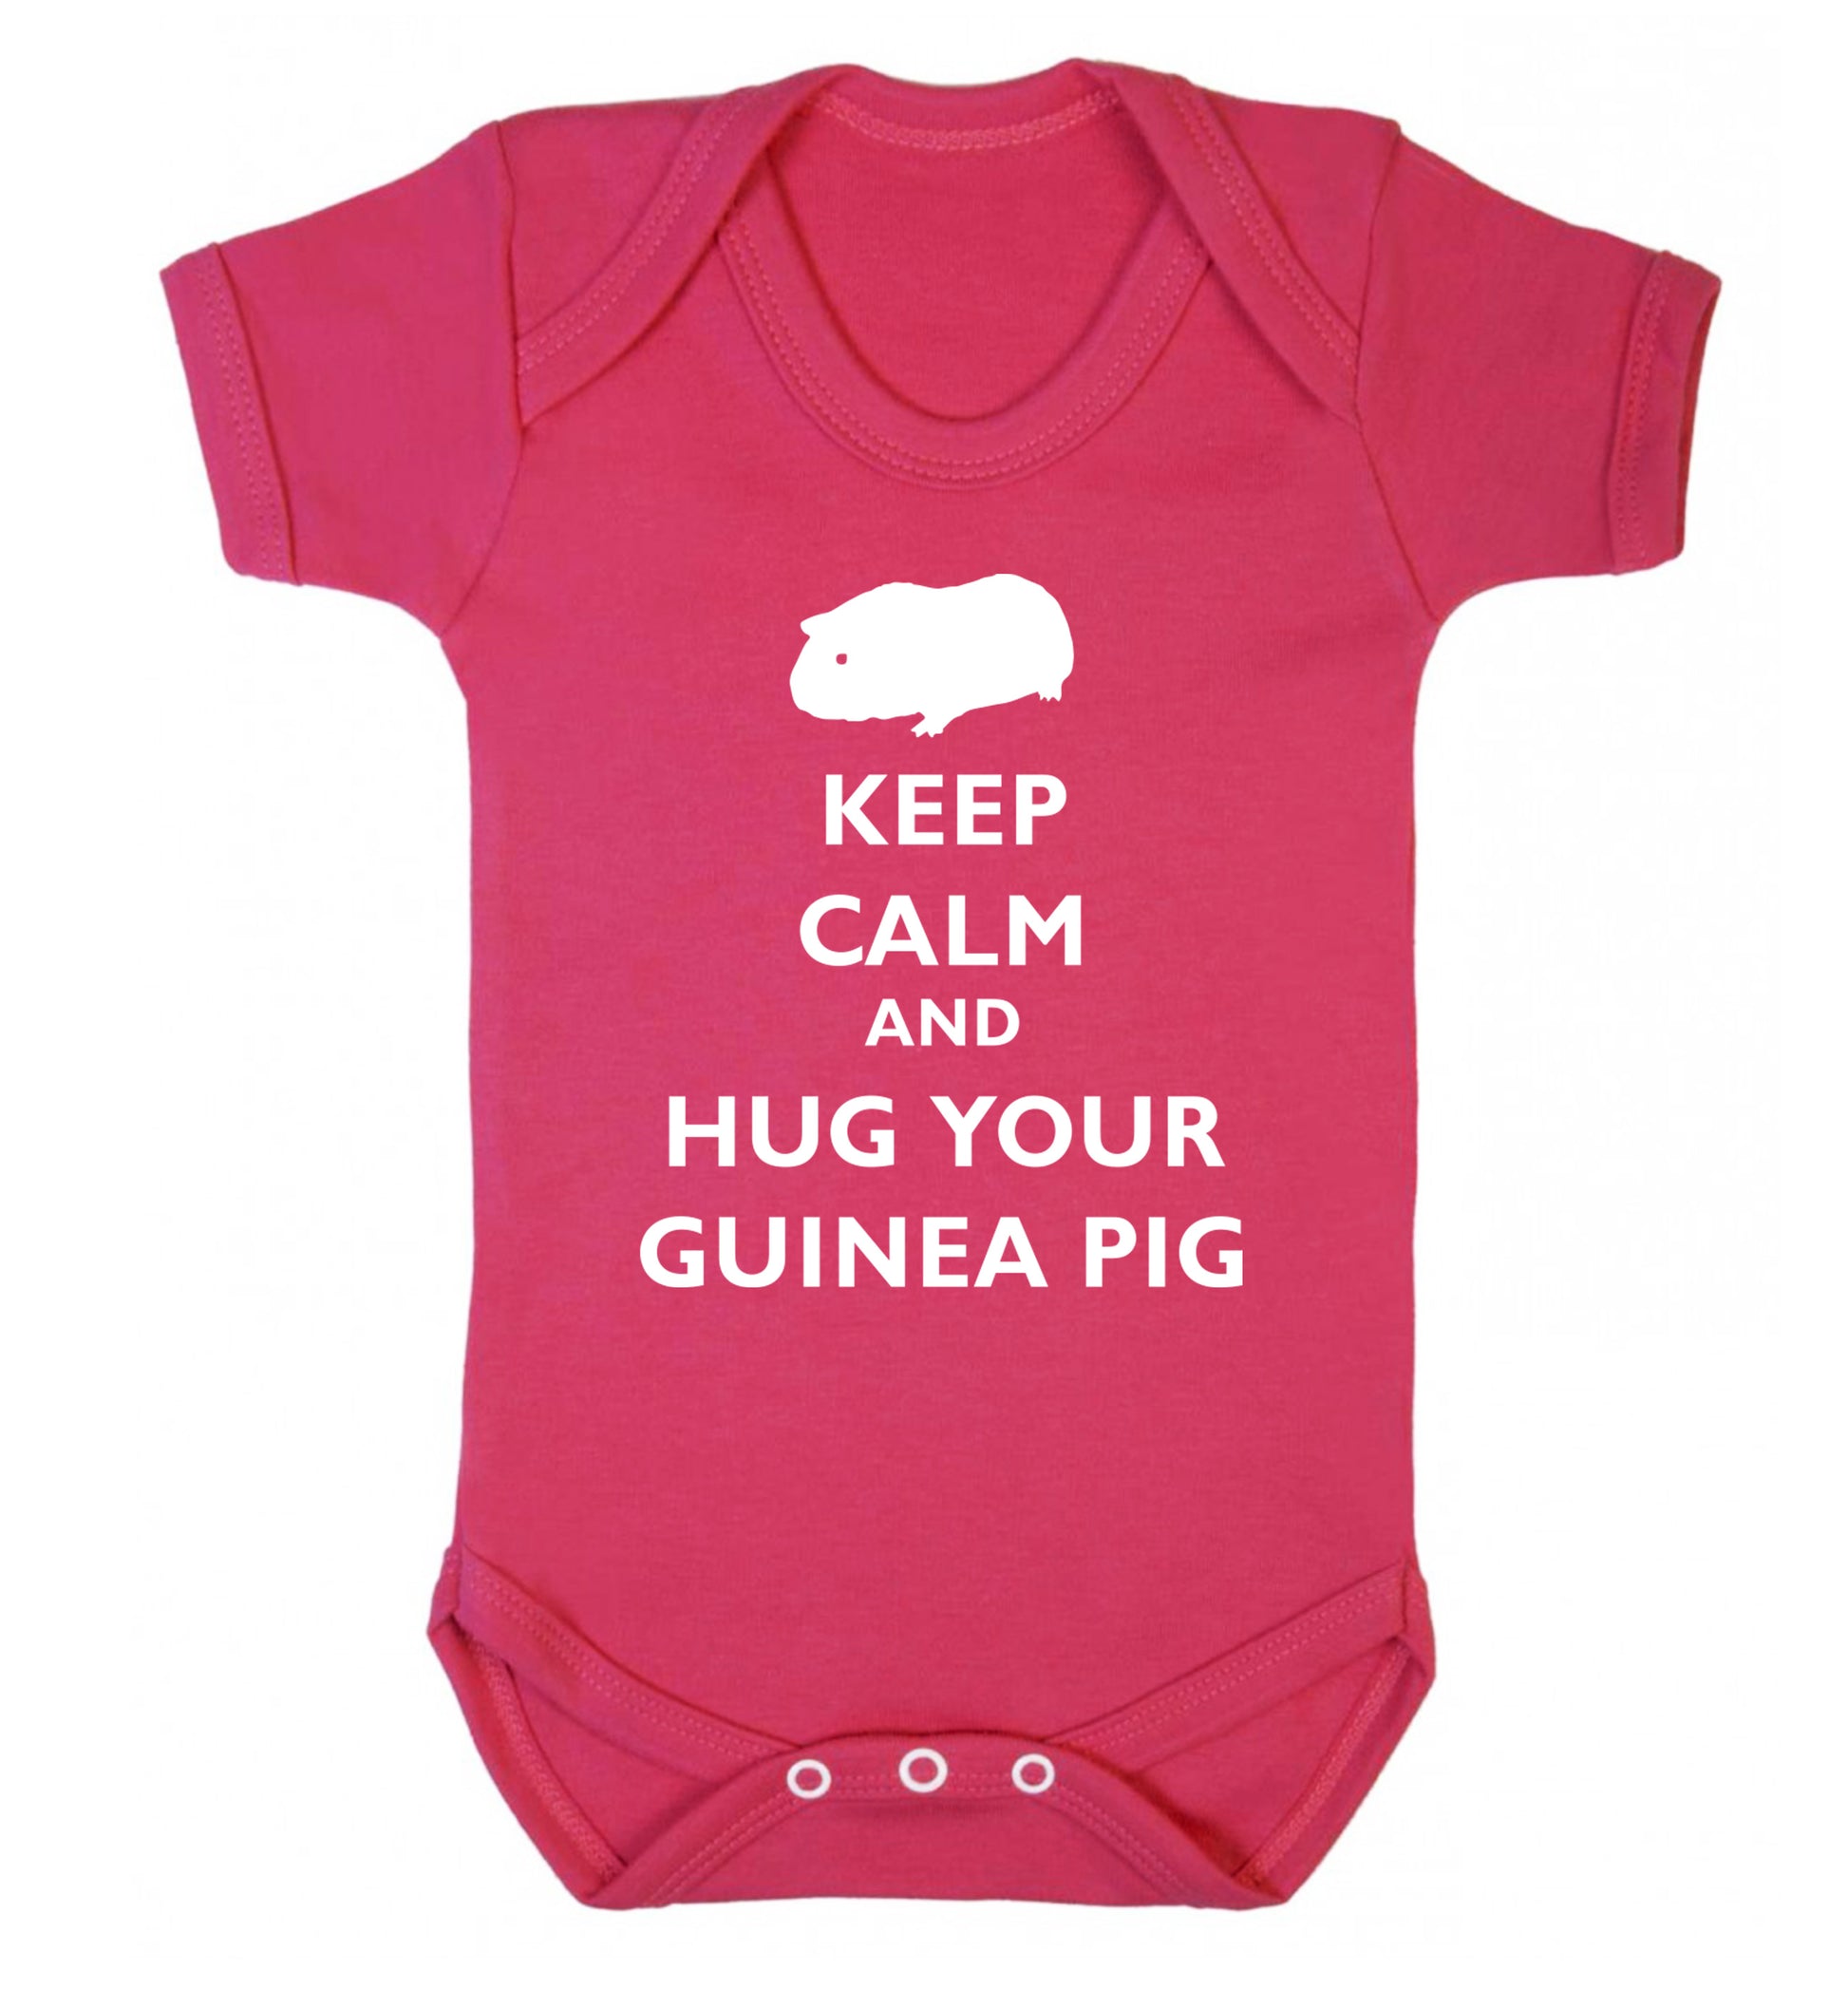 Keep calm and hug your guineapig Baby Vest dark pink 18-24 months